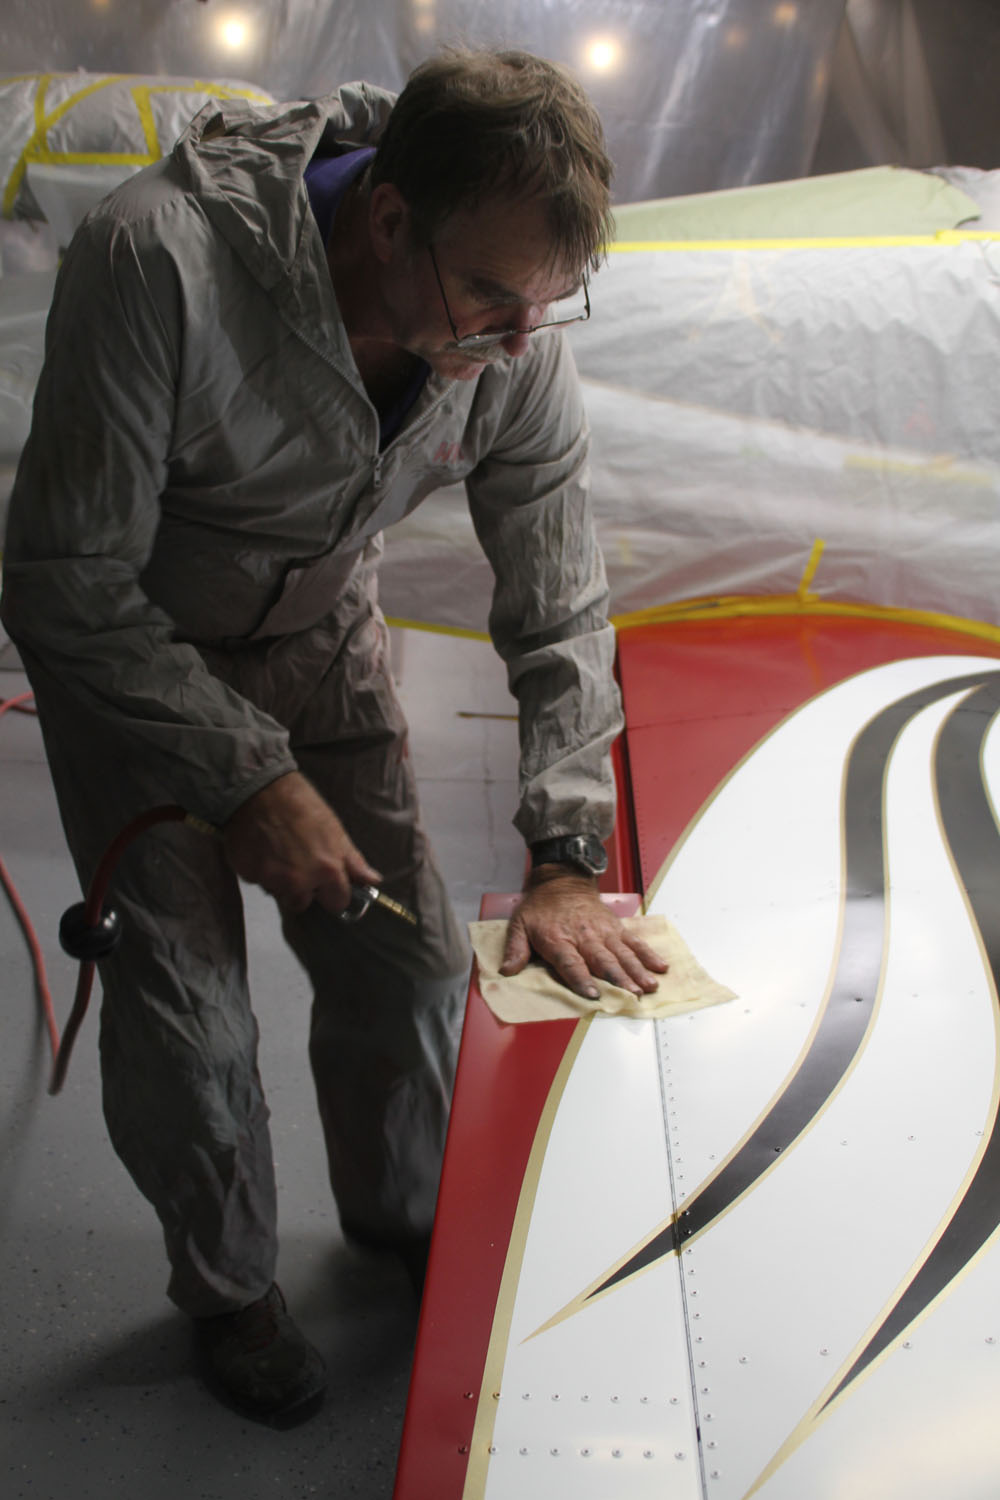 High pressure air and a dry cloth were used in the last step before applying clear coat.